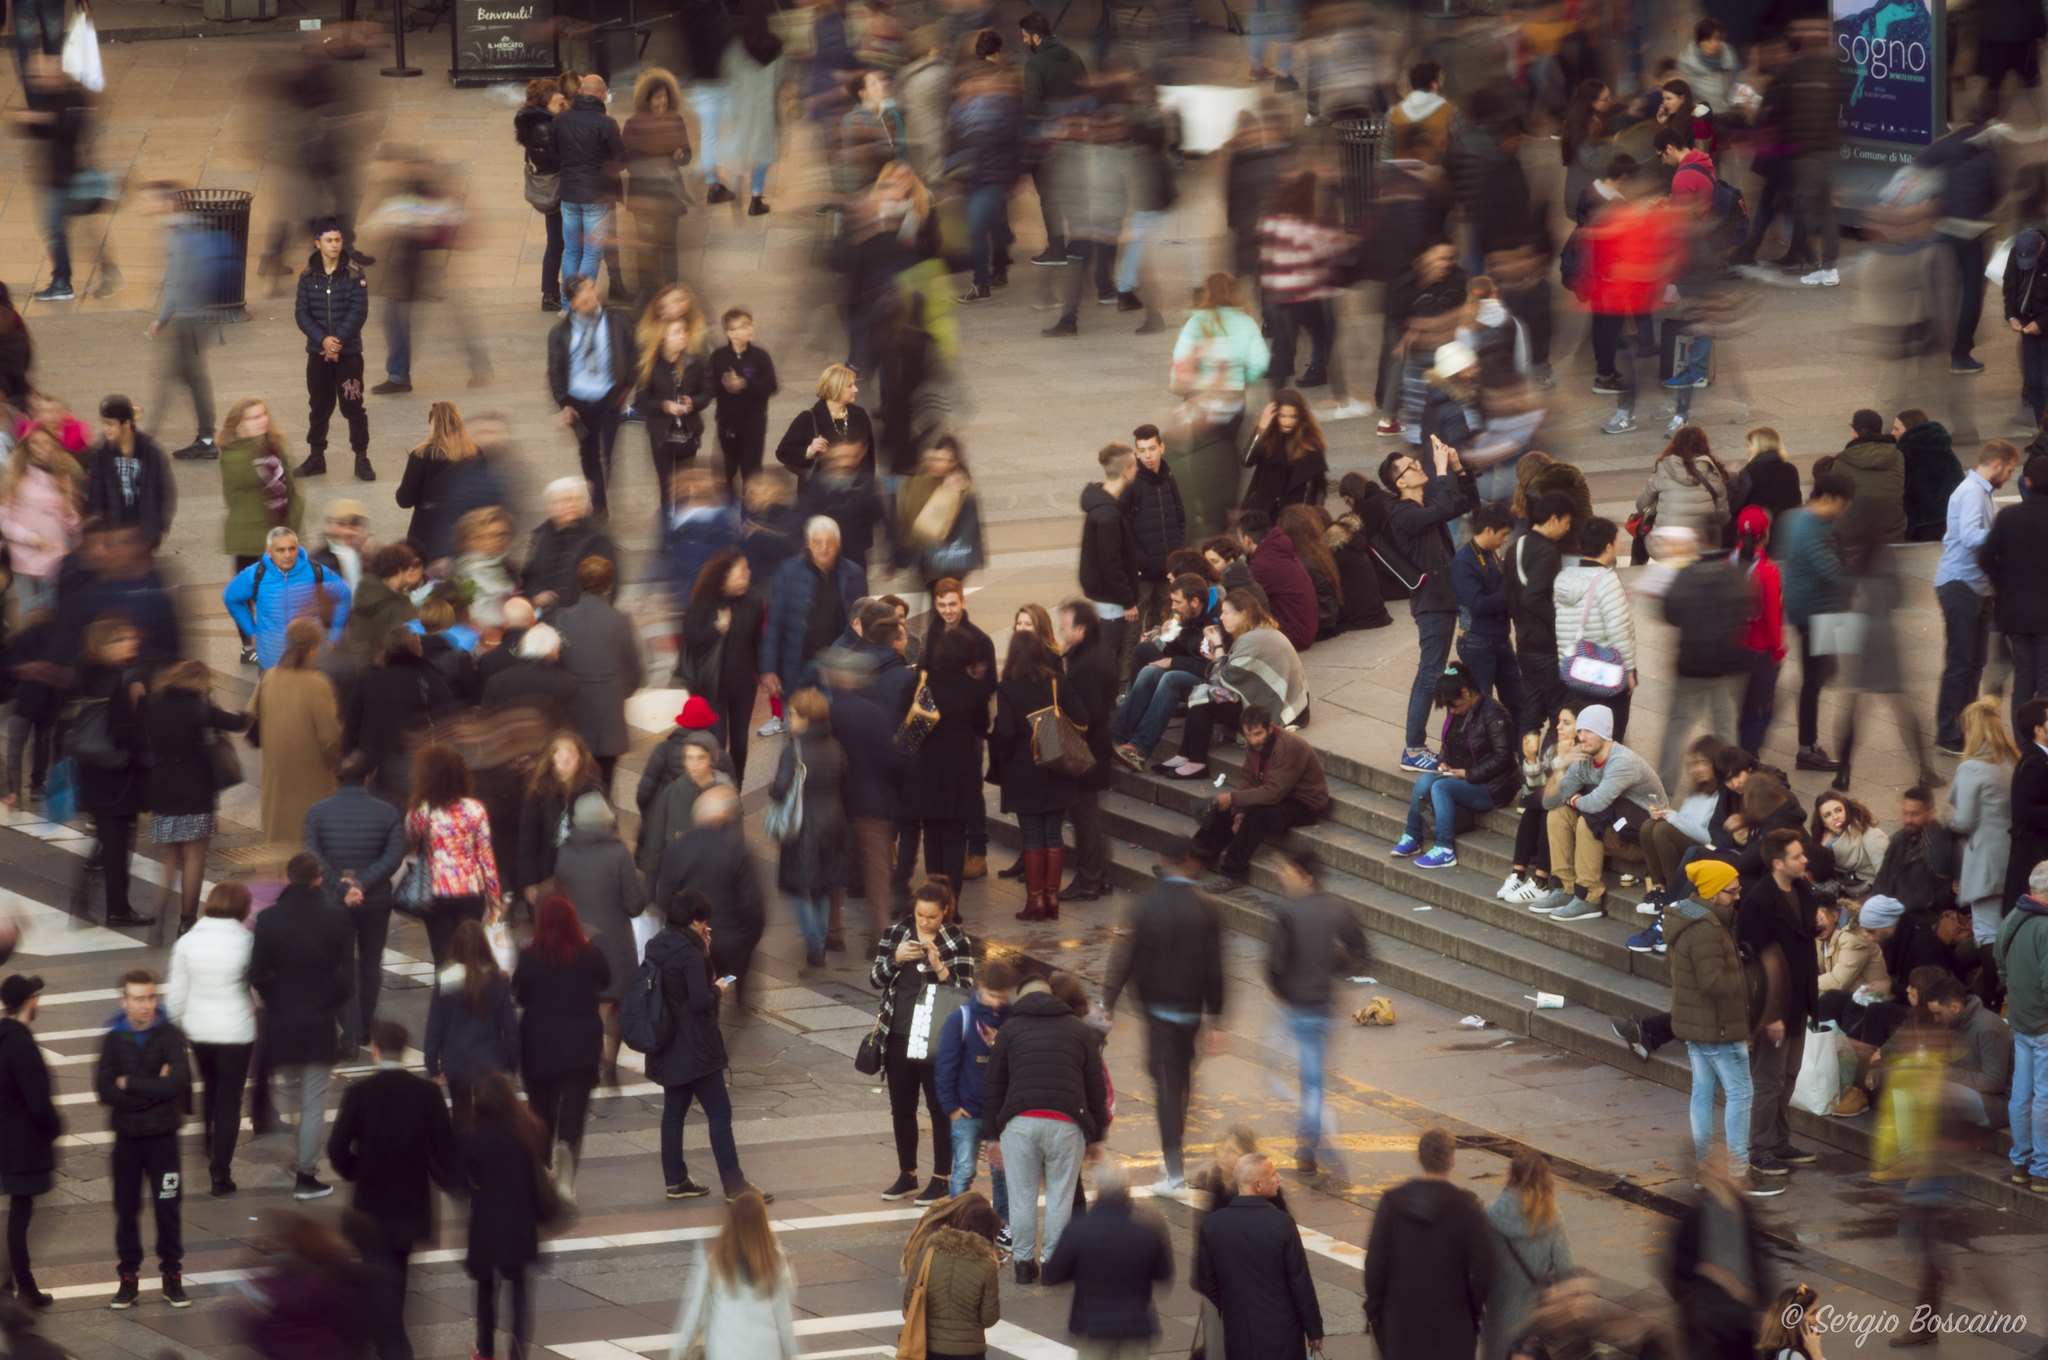 Birds-eye view of a crowd of people. Some people are in focus and others are blurred.